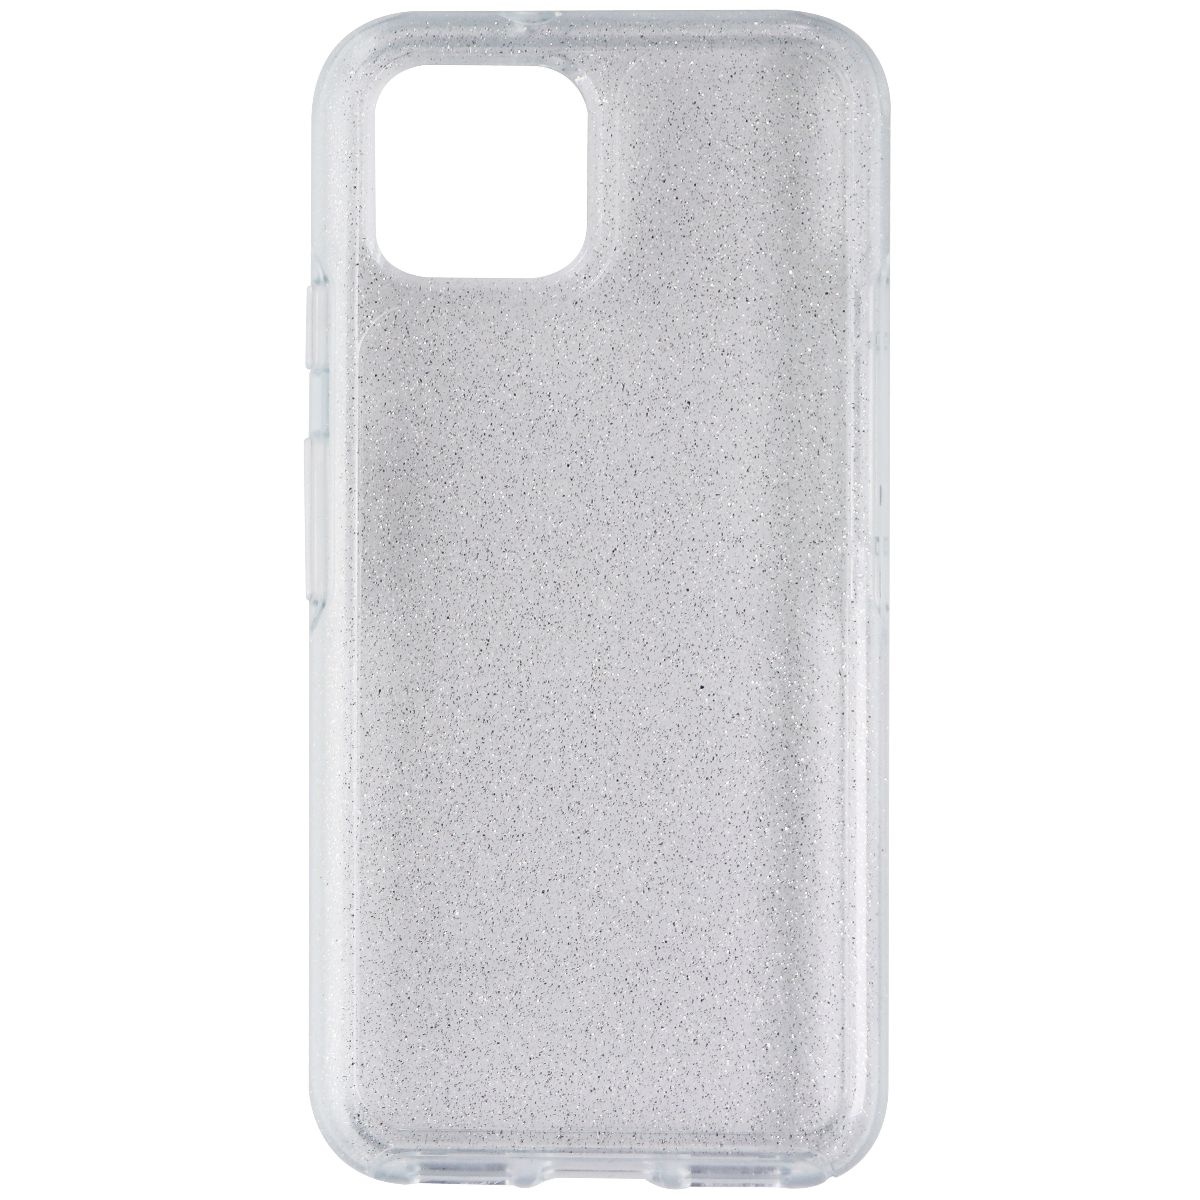 OtterBox Symmetry Series Case for Google Pixel 4 Smartphone - Stardust/Clear (Used) - image 2 of 3